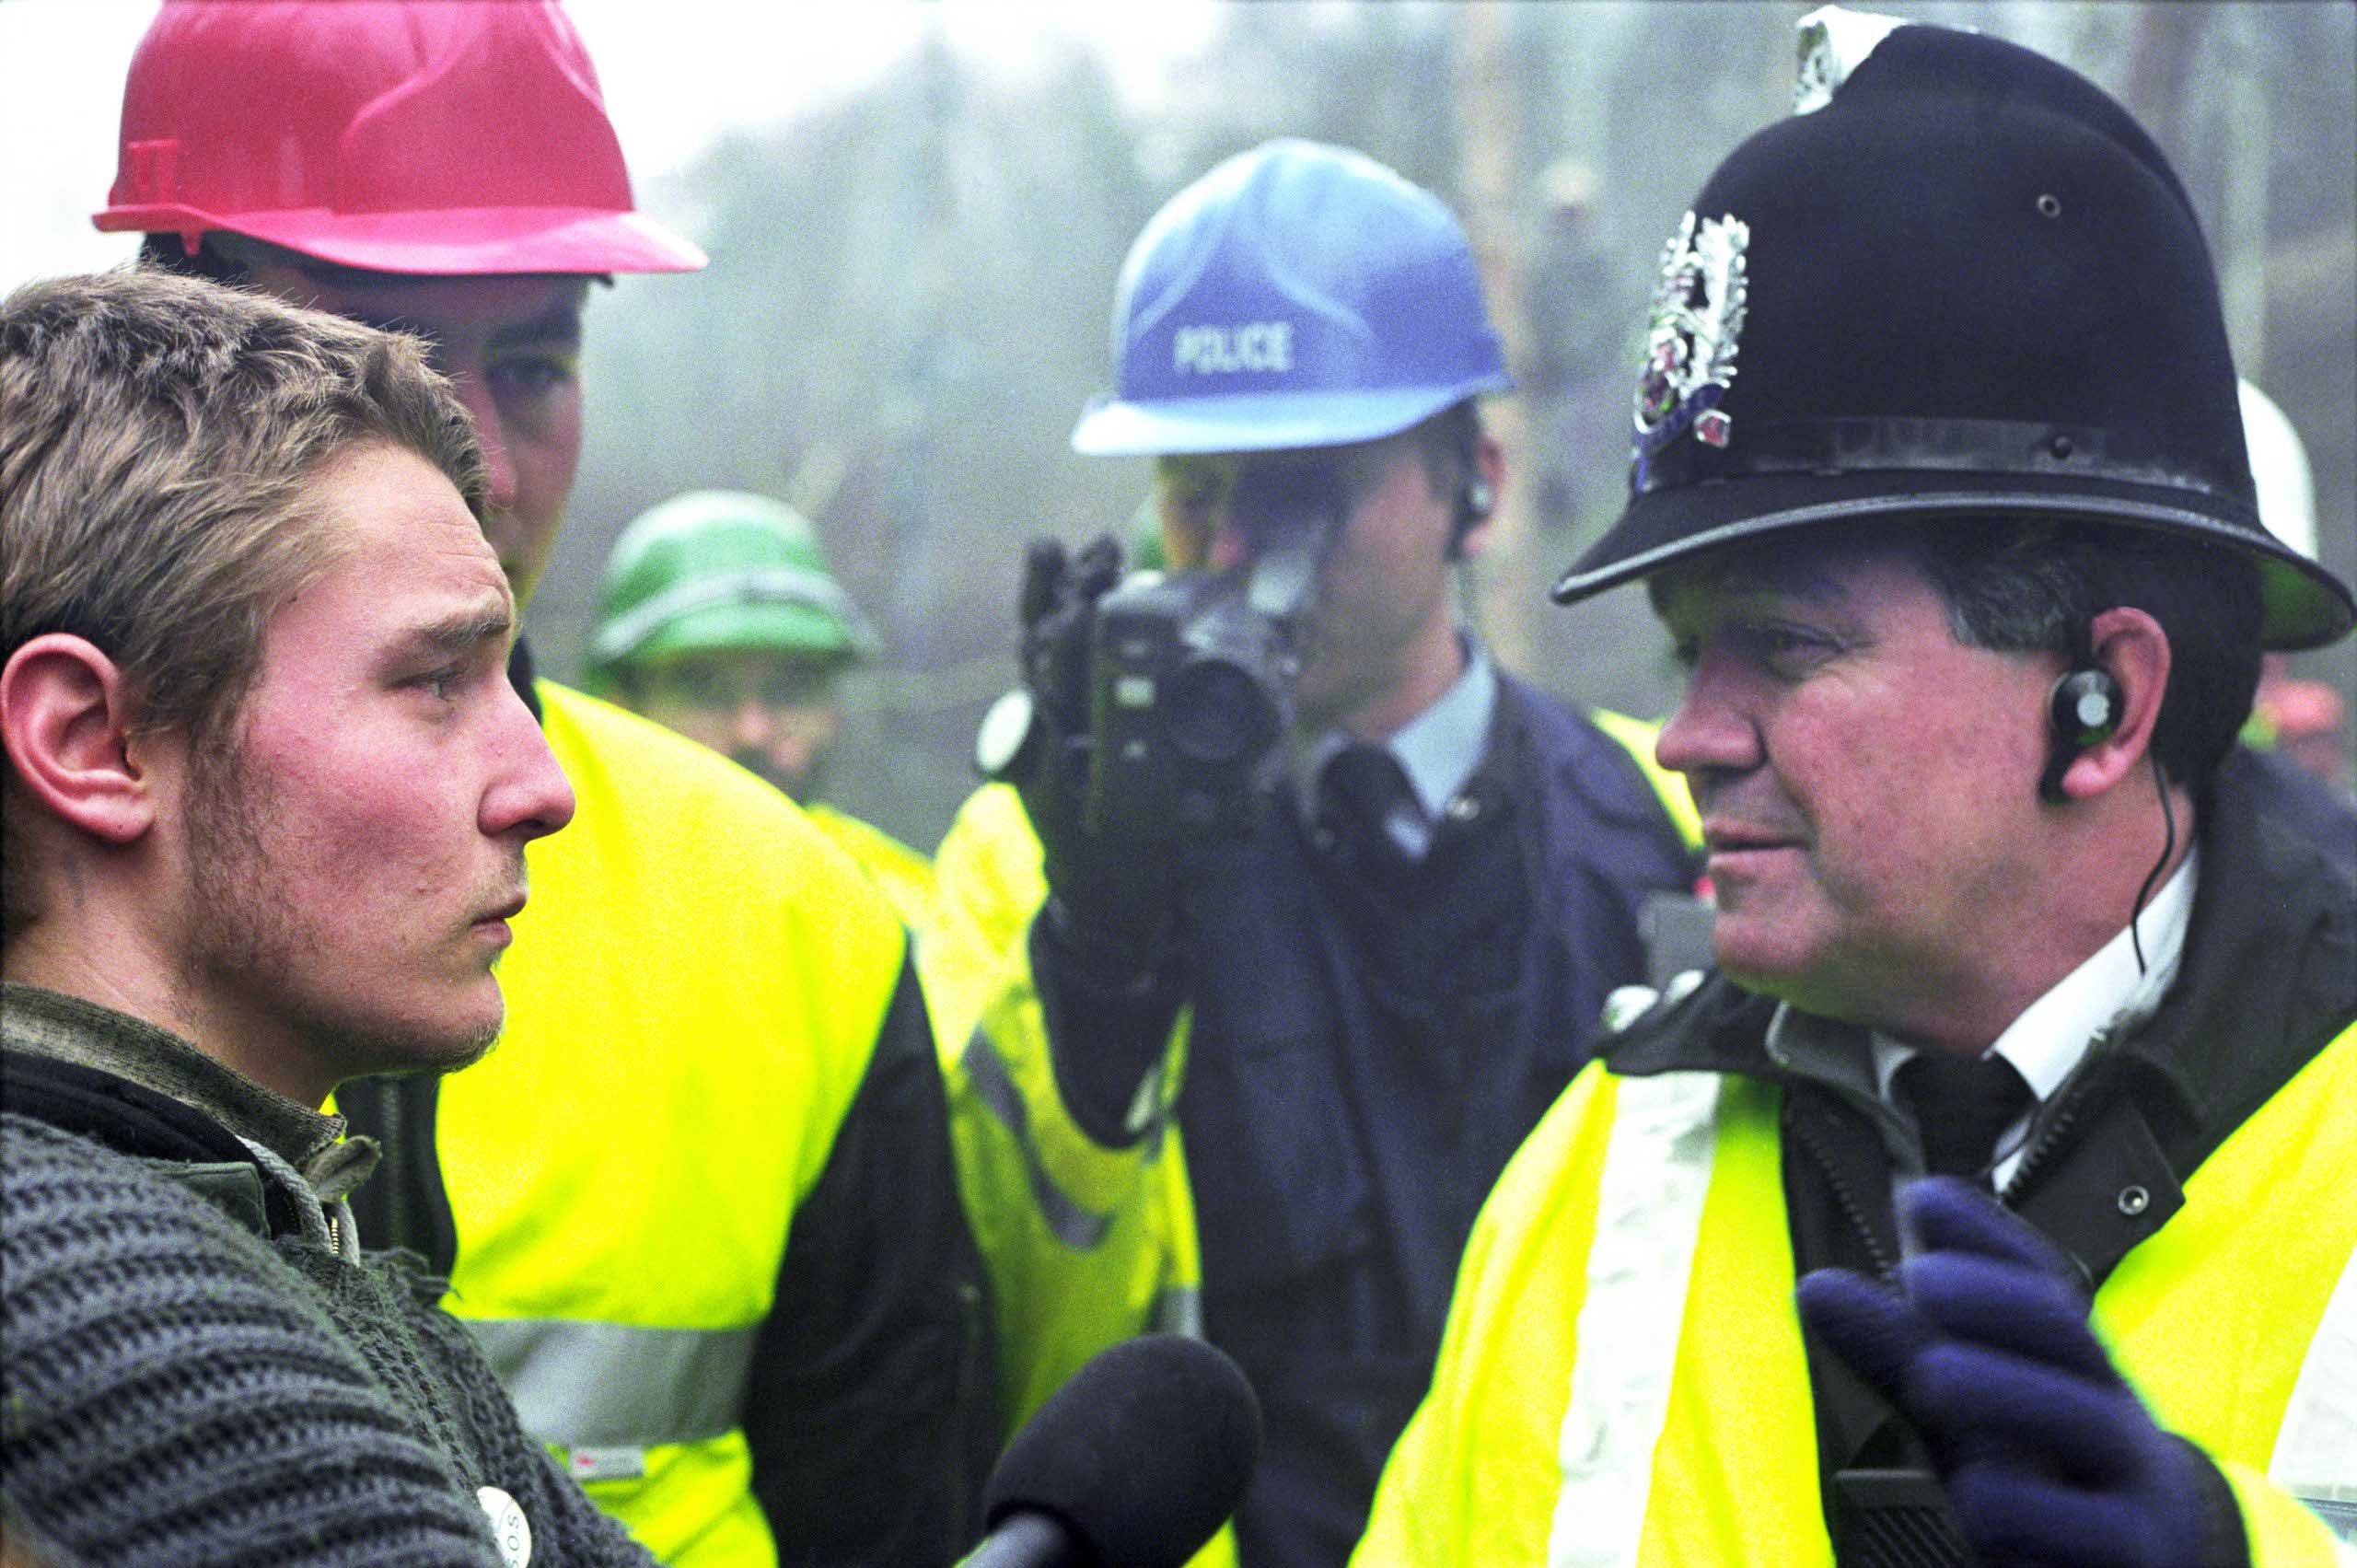 A young man makes eye contact with a police officer while someone films on a video camera in the background. Historical photograph